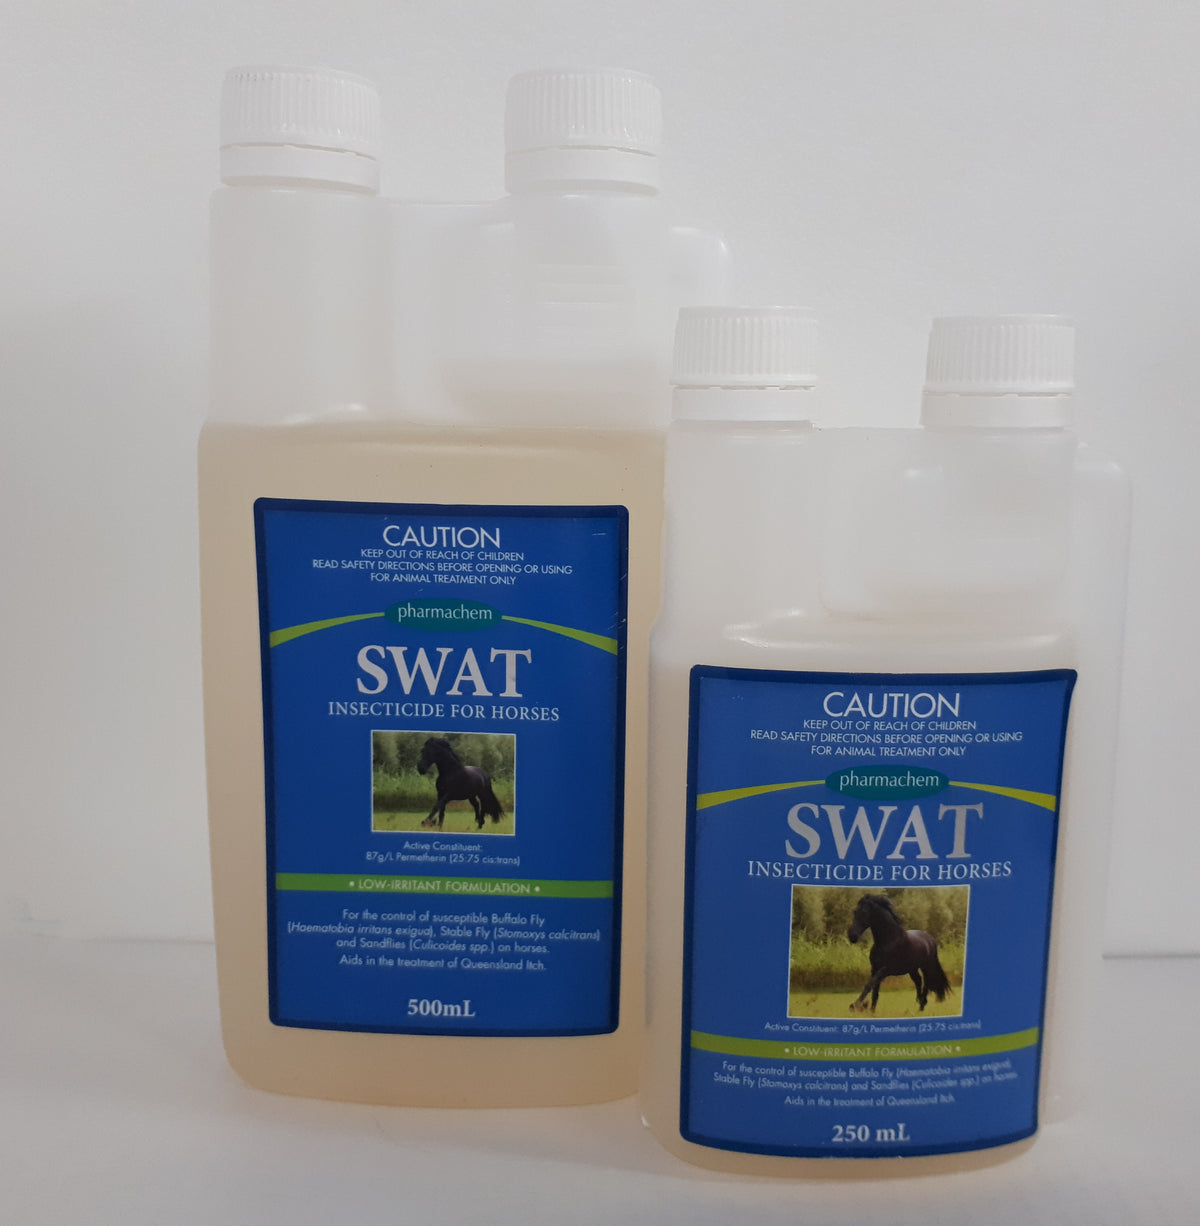 SWAT INSECTICIDE FOR HORSES